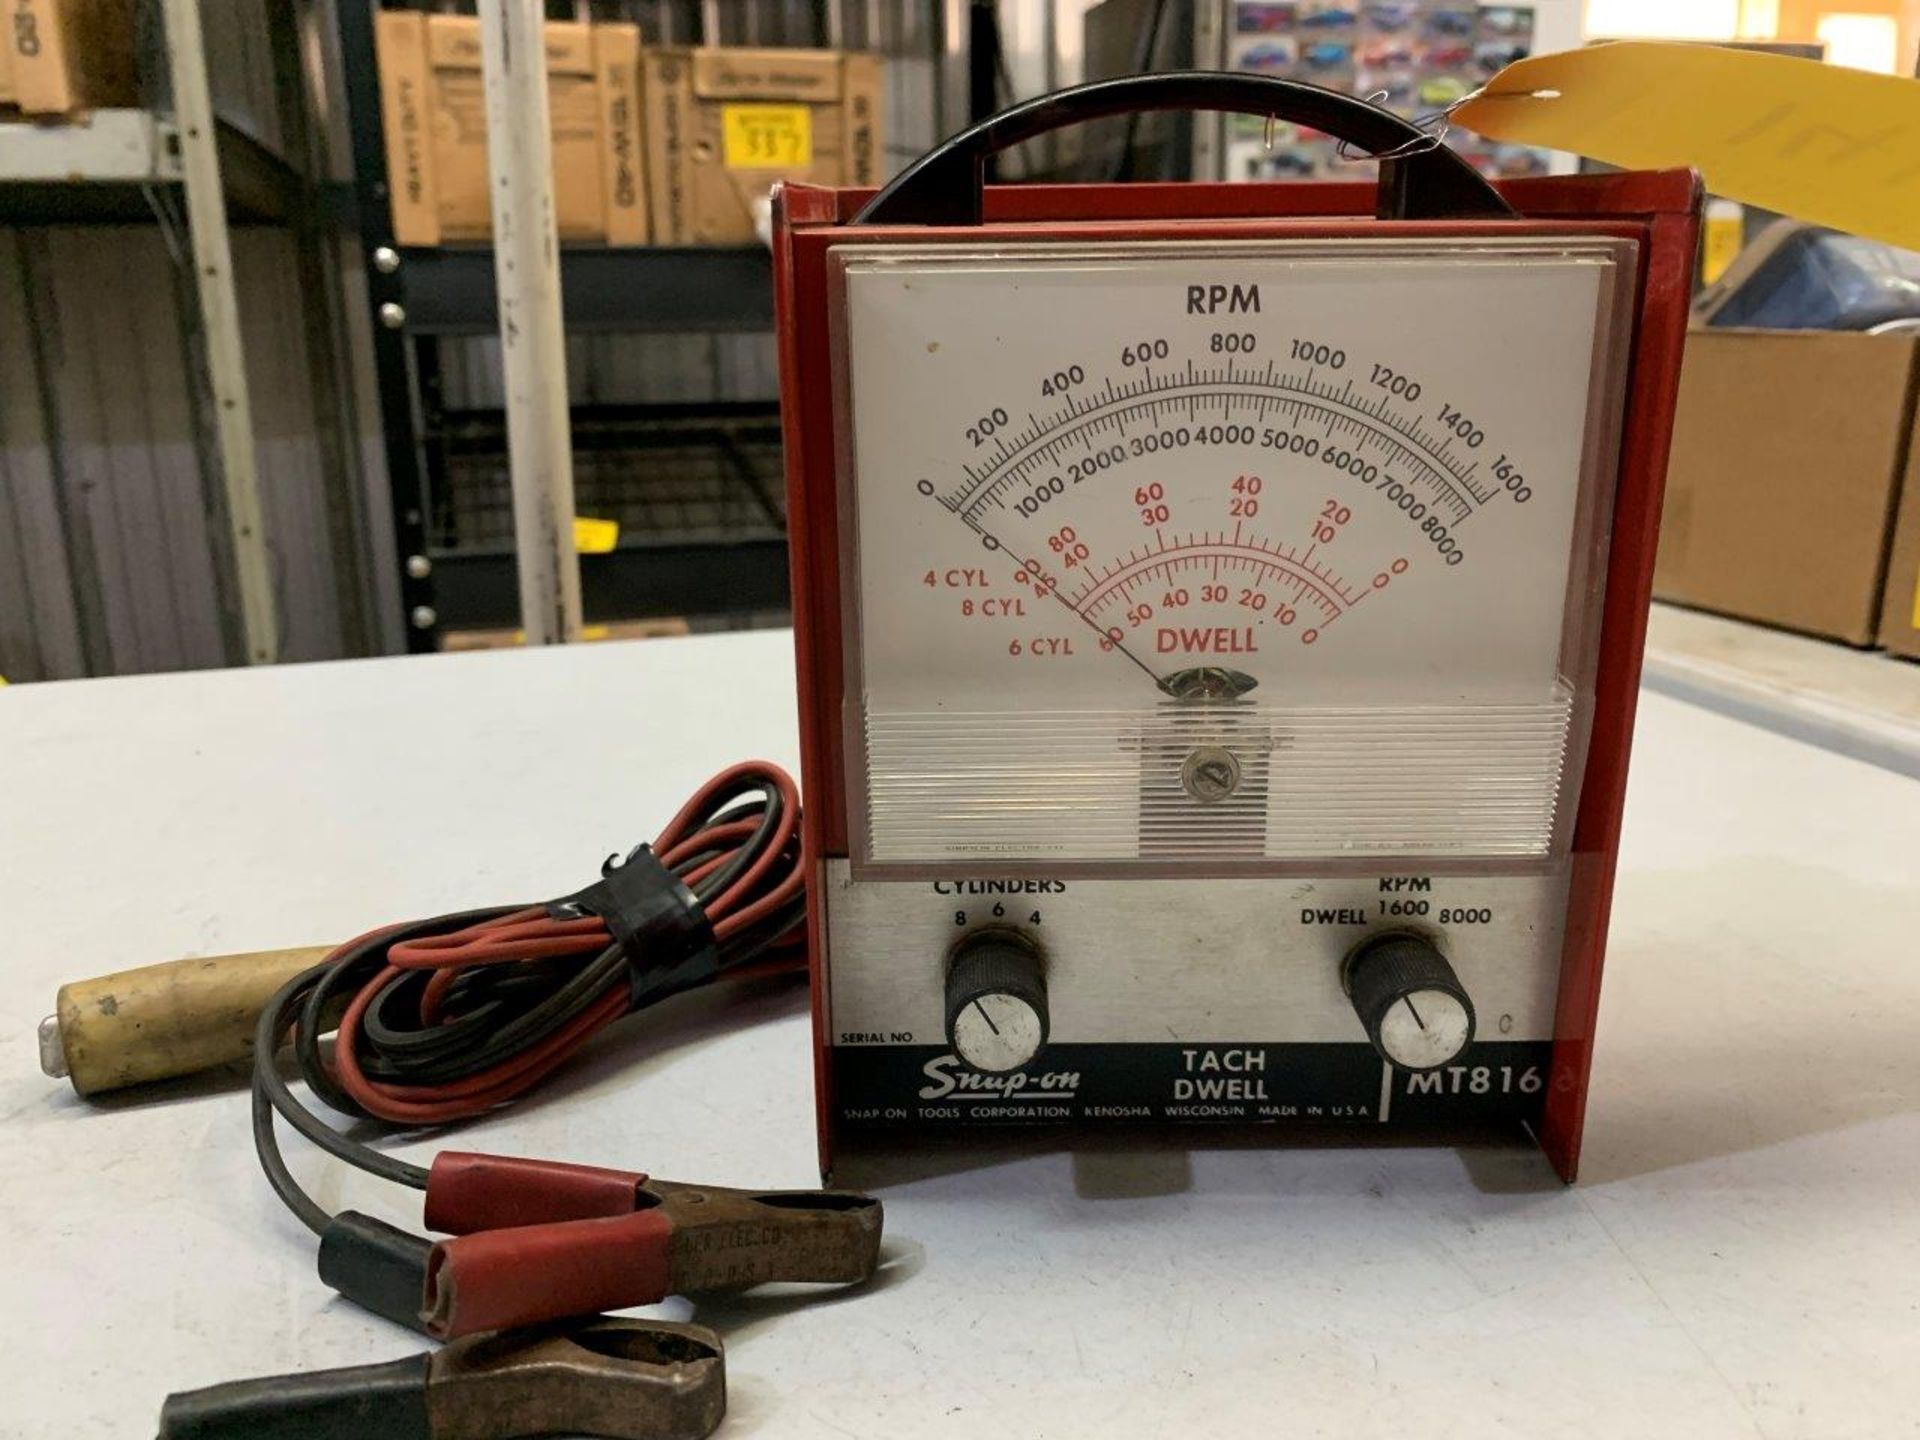 SNAP-ON MT816 TECH DWELL TACHOMETER - Image 2 of 3